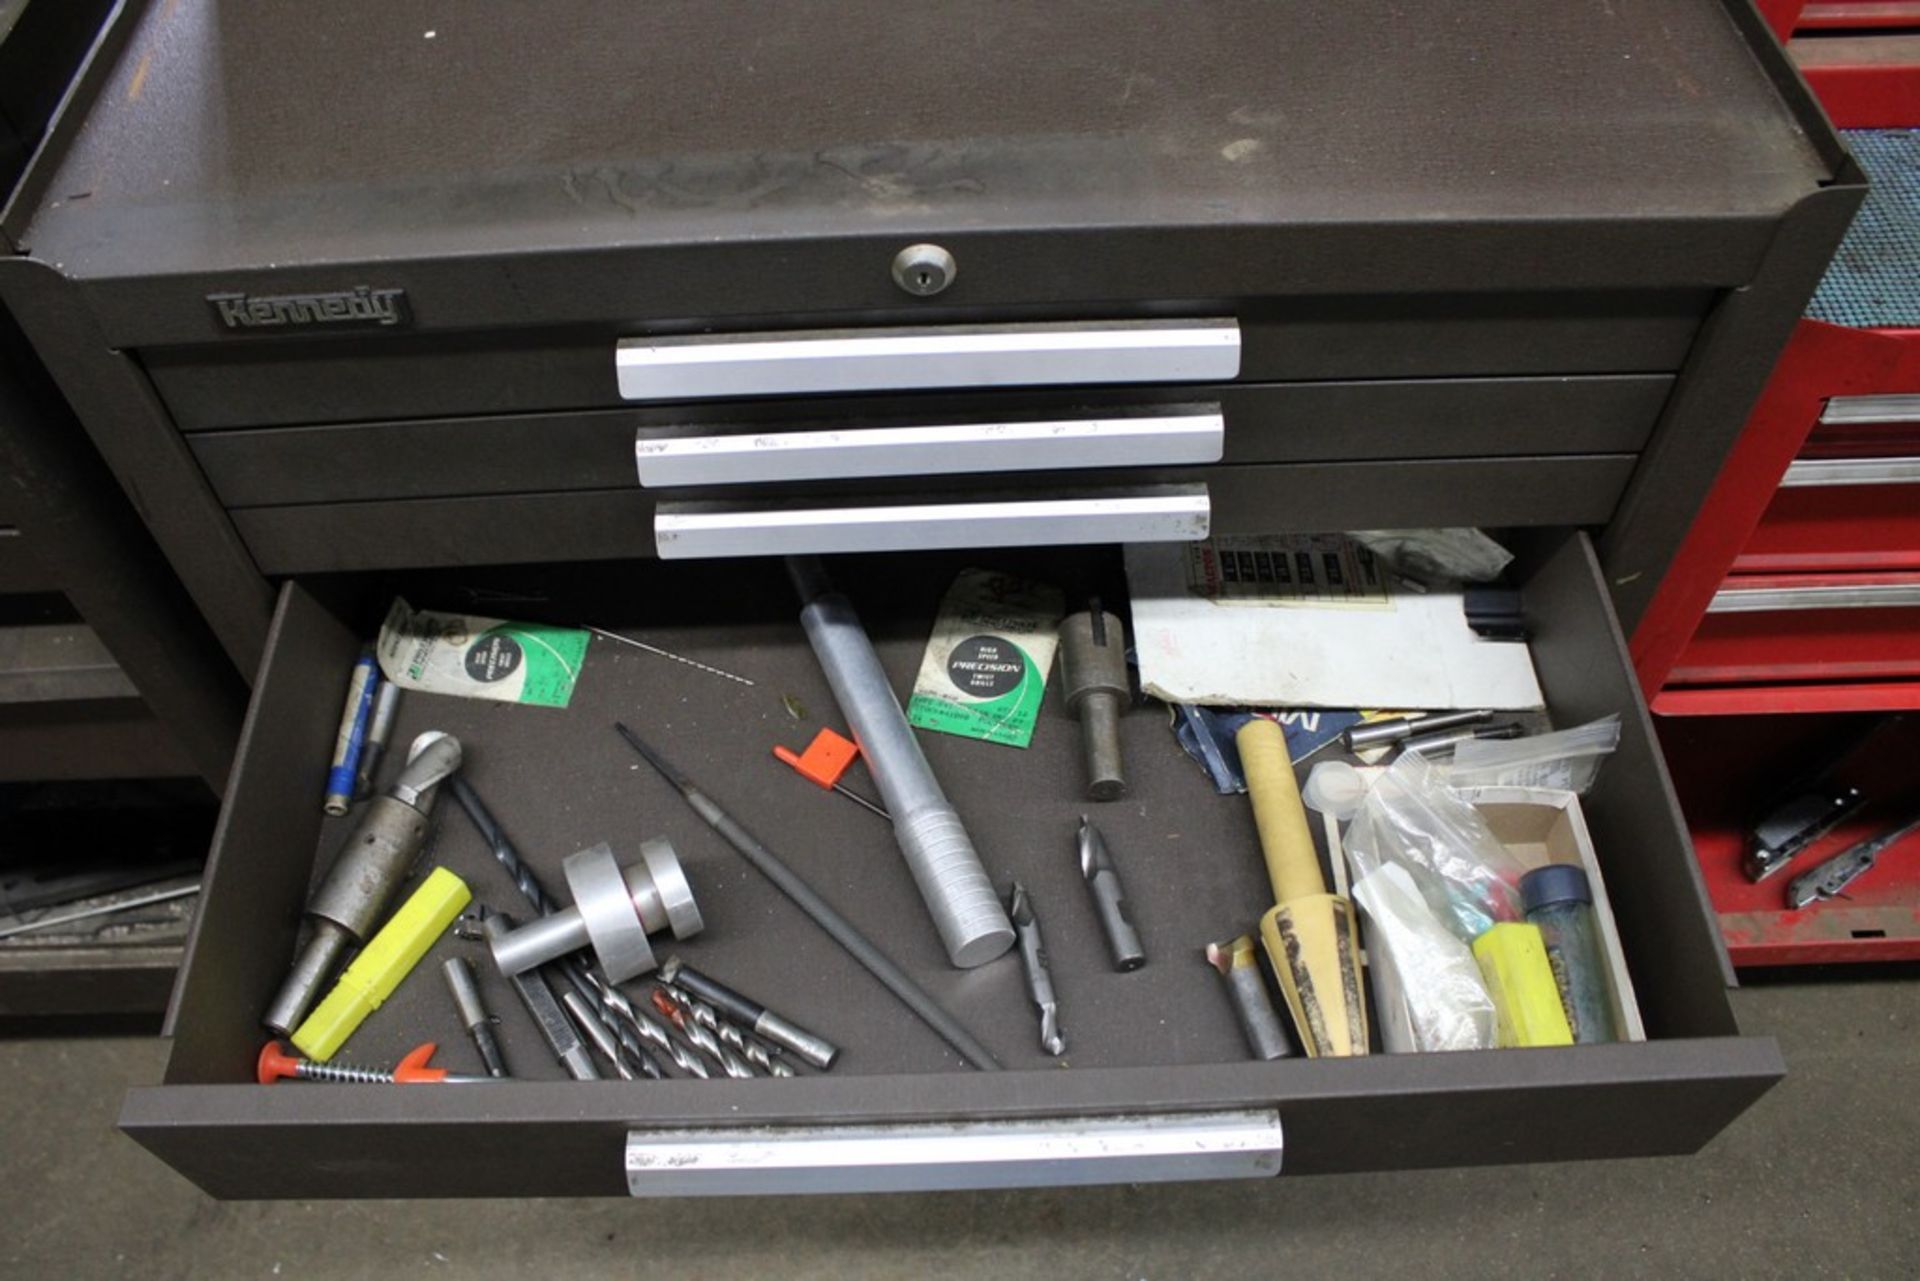 KENNEDY SIX DRAWER PORTABLE TOOL BOX WITH CRAFTSMAN STACKING SIX DRAWER CHEST 27" X 18" X 36" - Image 5 of 5